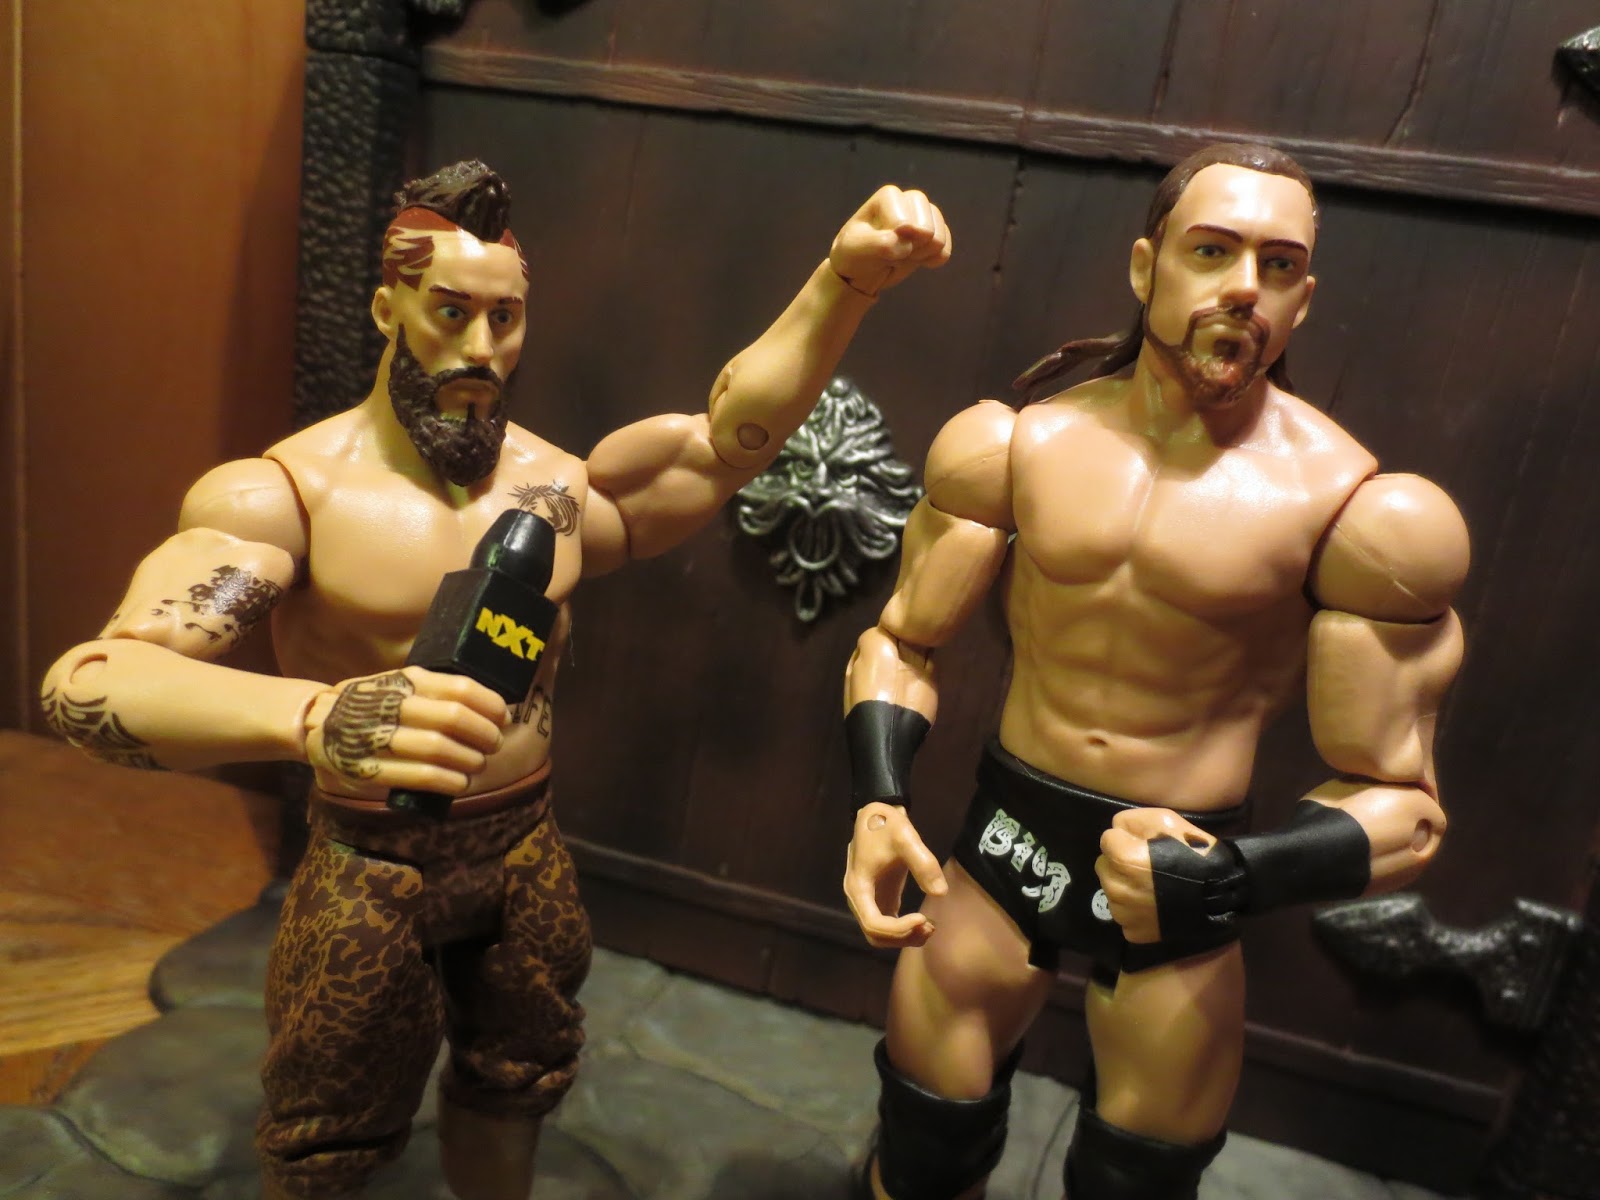 Action Figure Barbecue: Action Figure Review: Enzo Amore & Big Cass